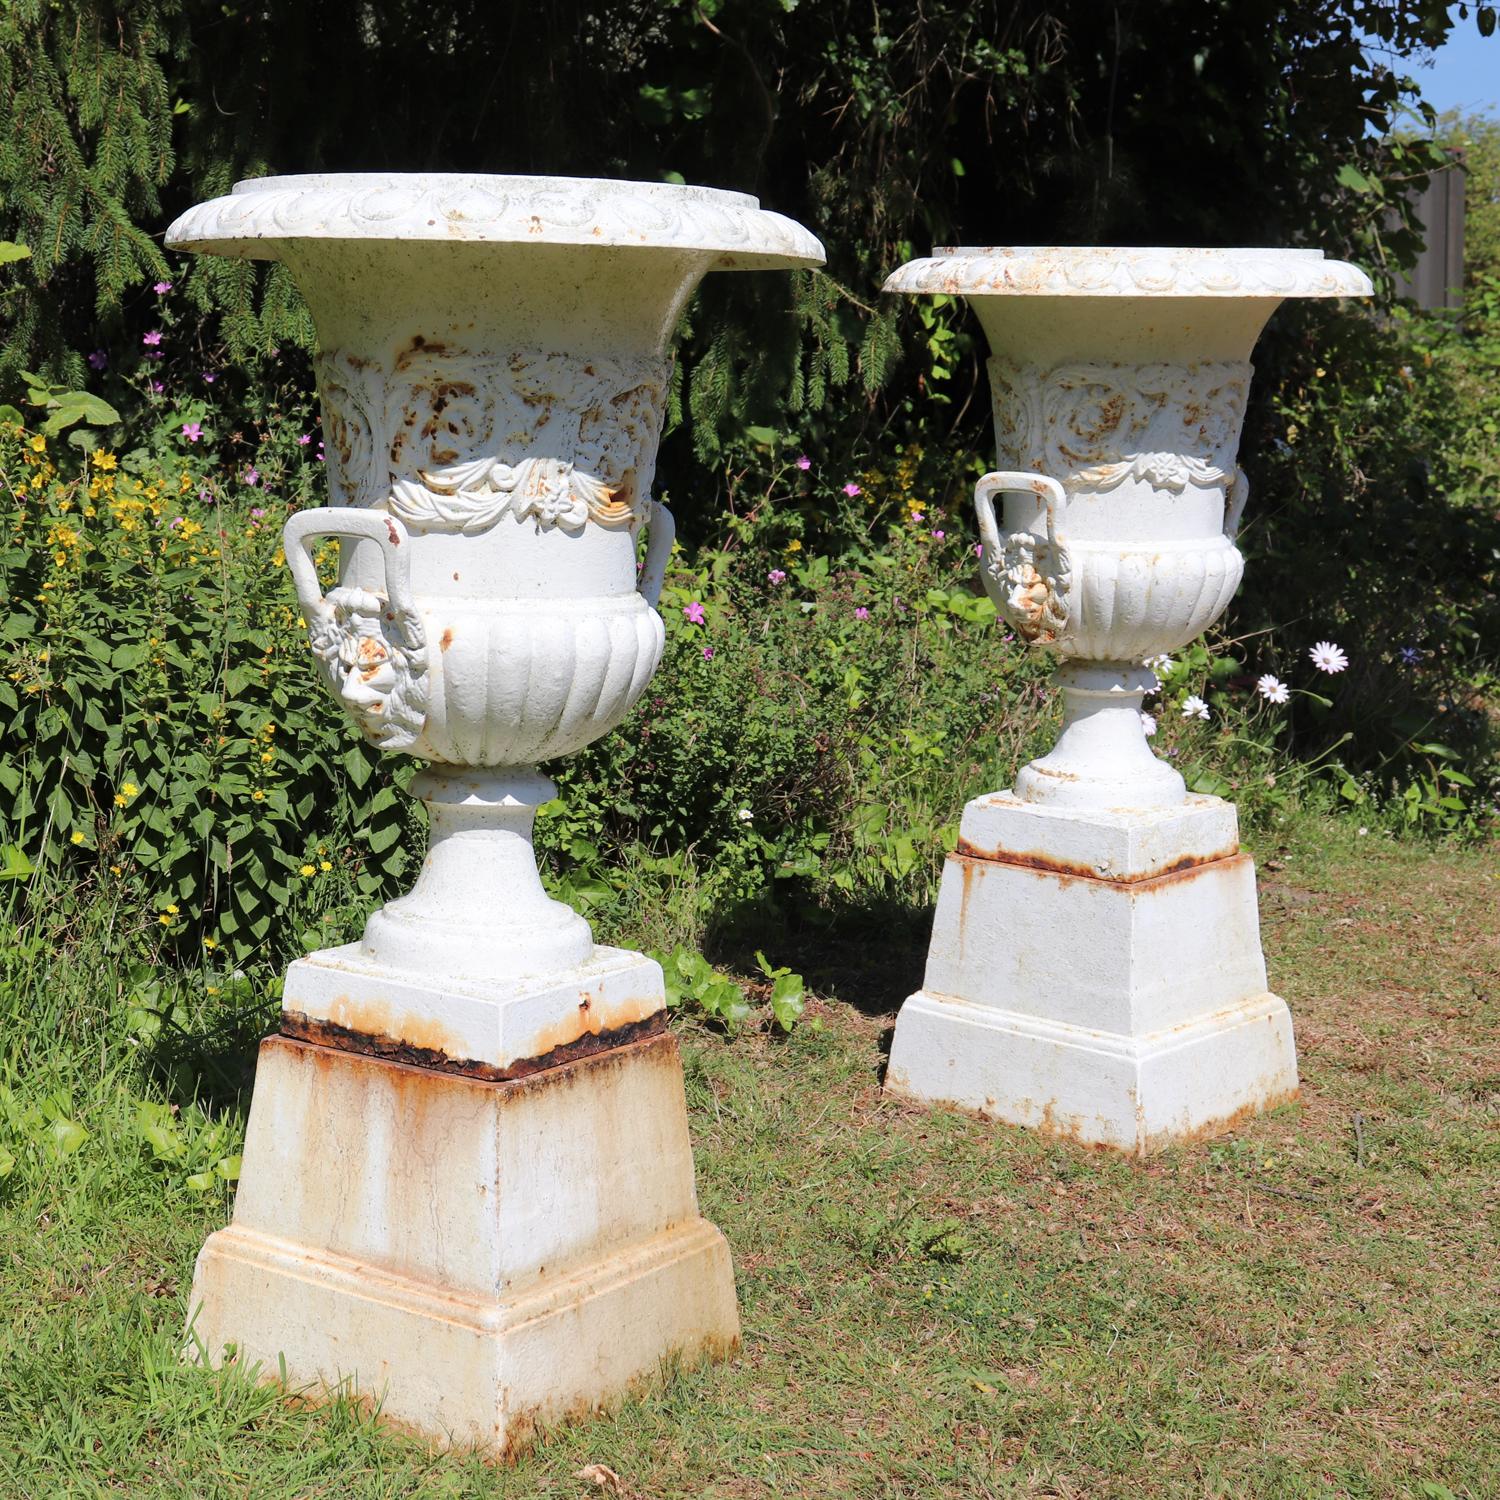 Pair of cast iron urns on plinth
This pair of cast iron urns are a two-piece (Urn on Plinth bases ) With decorative Lion head handles. They are solid cast iron from the 1960s with no damage. They have been weathered and have a slightly rusted